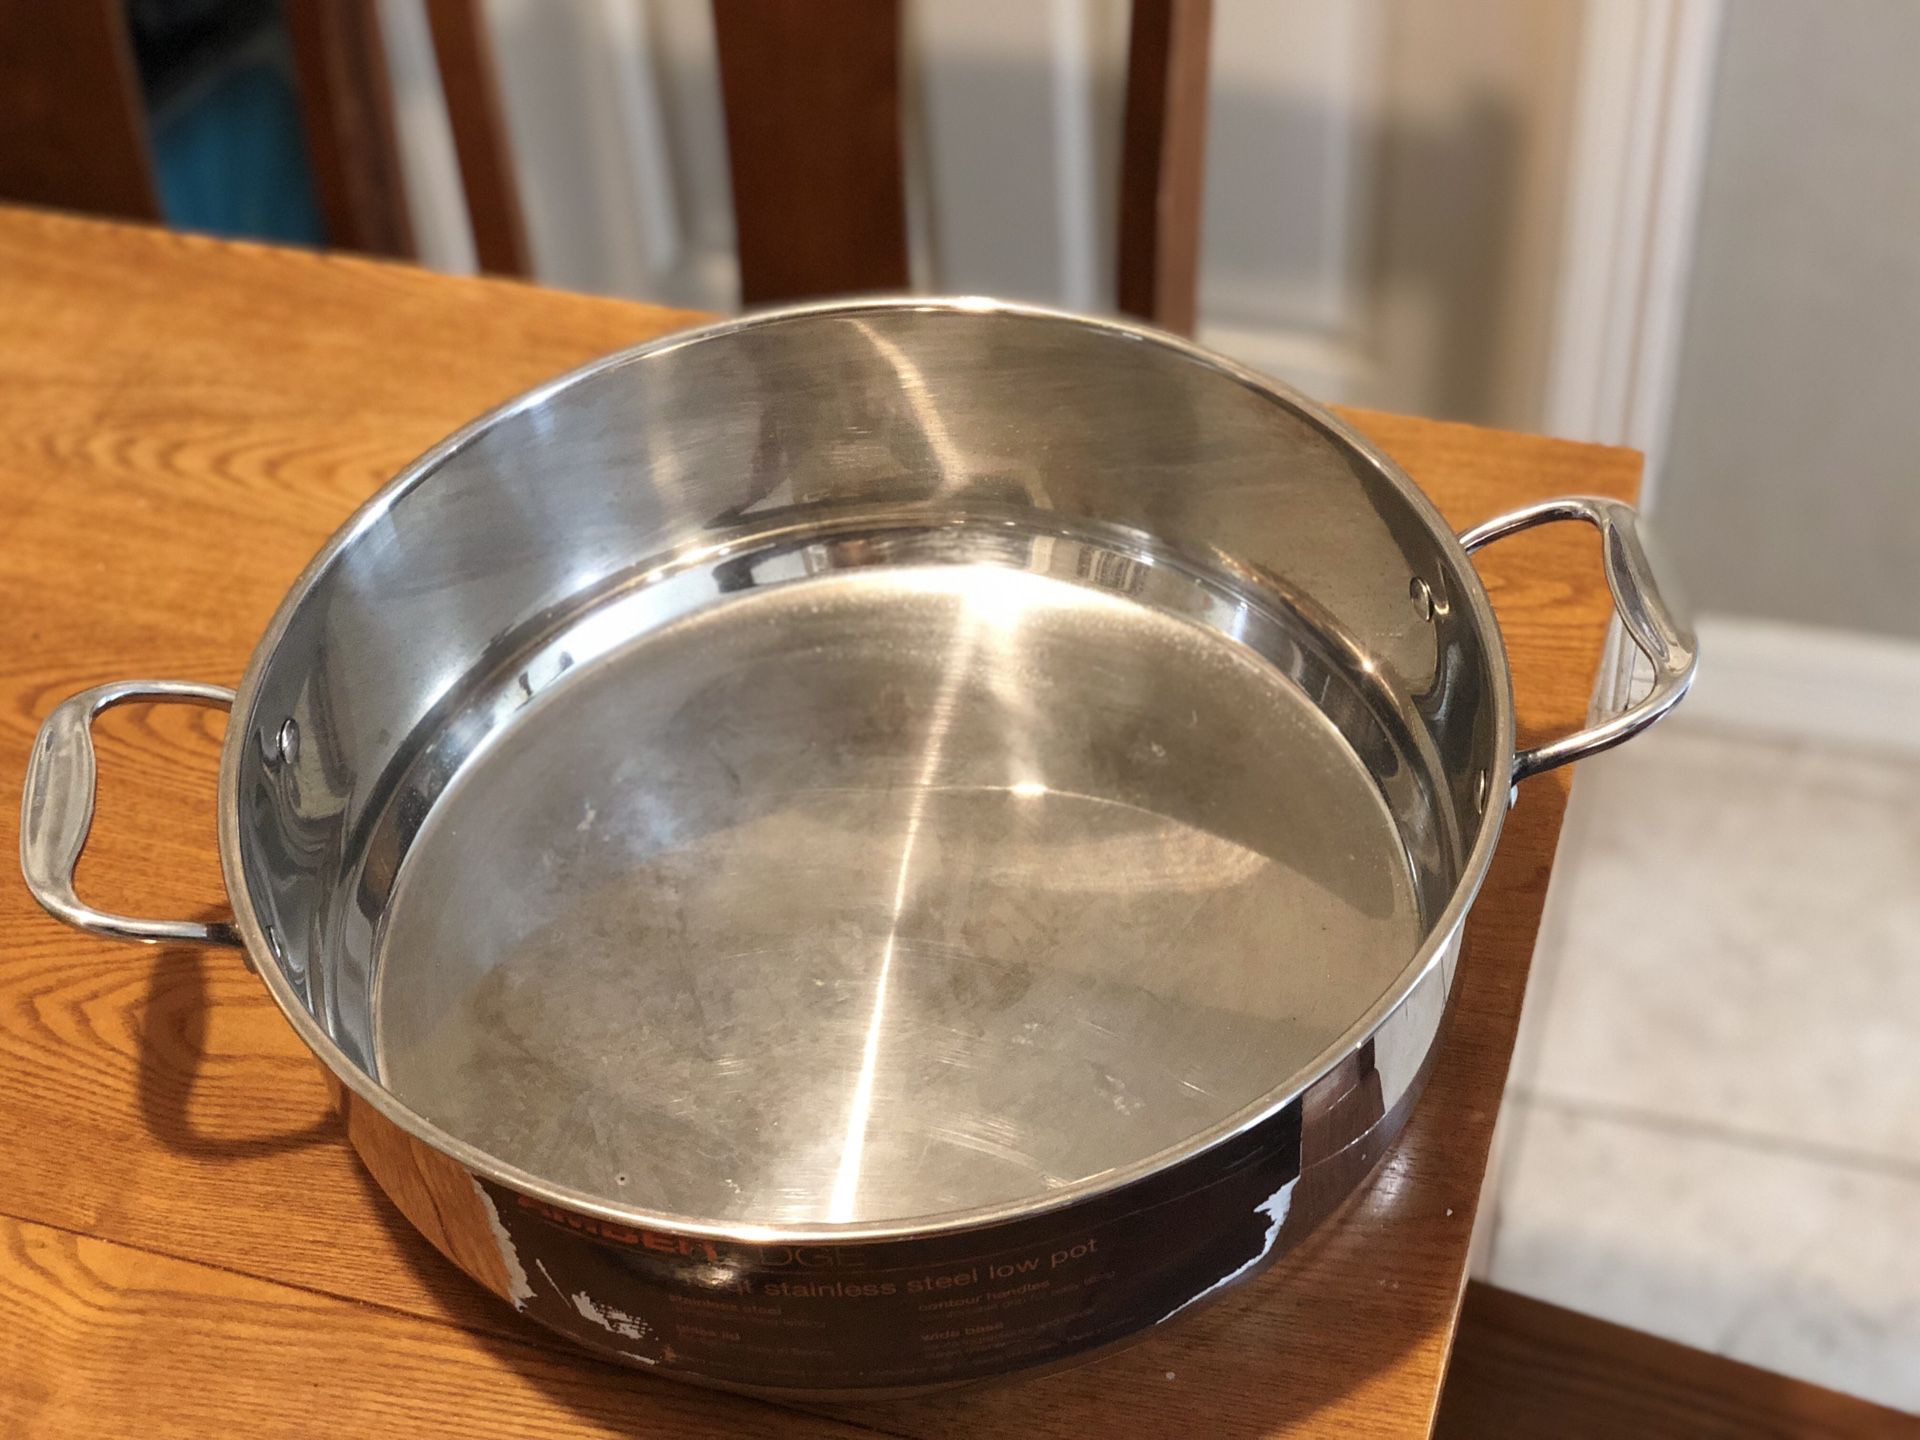 Comal Grande 22'. Big Cooking Pot 22' Stainless Steel for Sale in Columbia,  SC - OfferUp